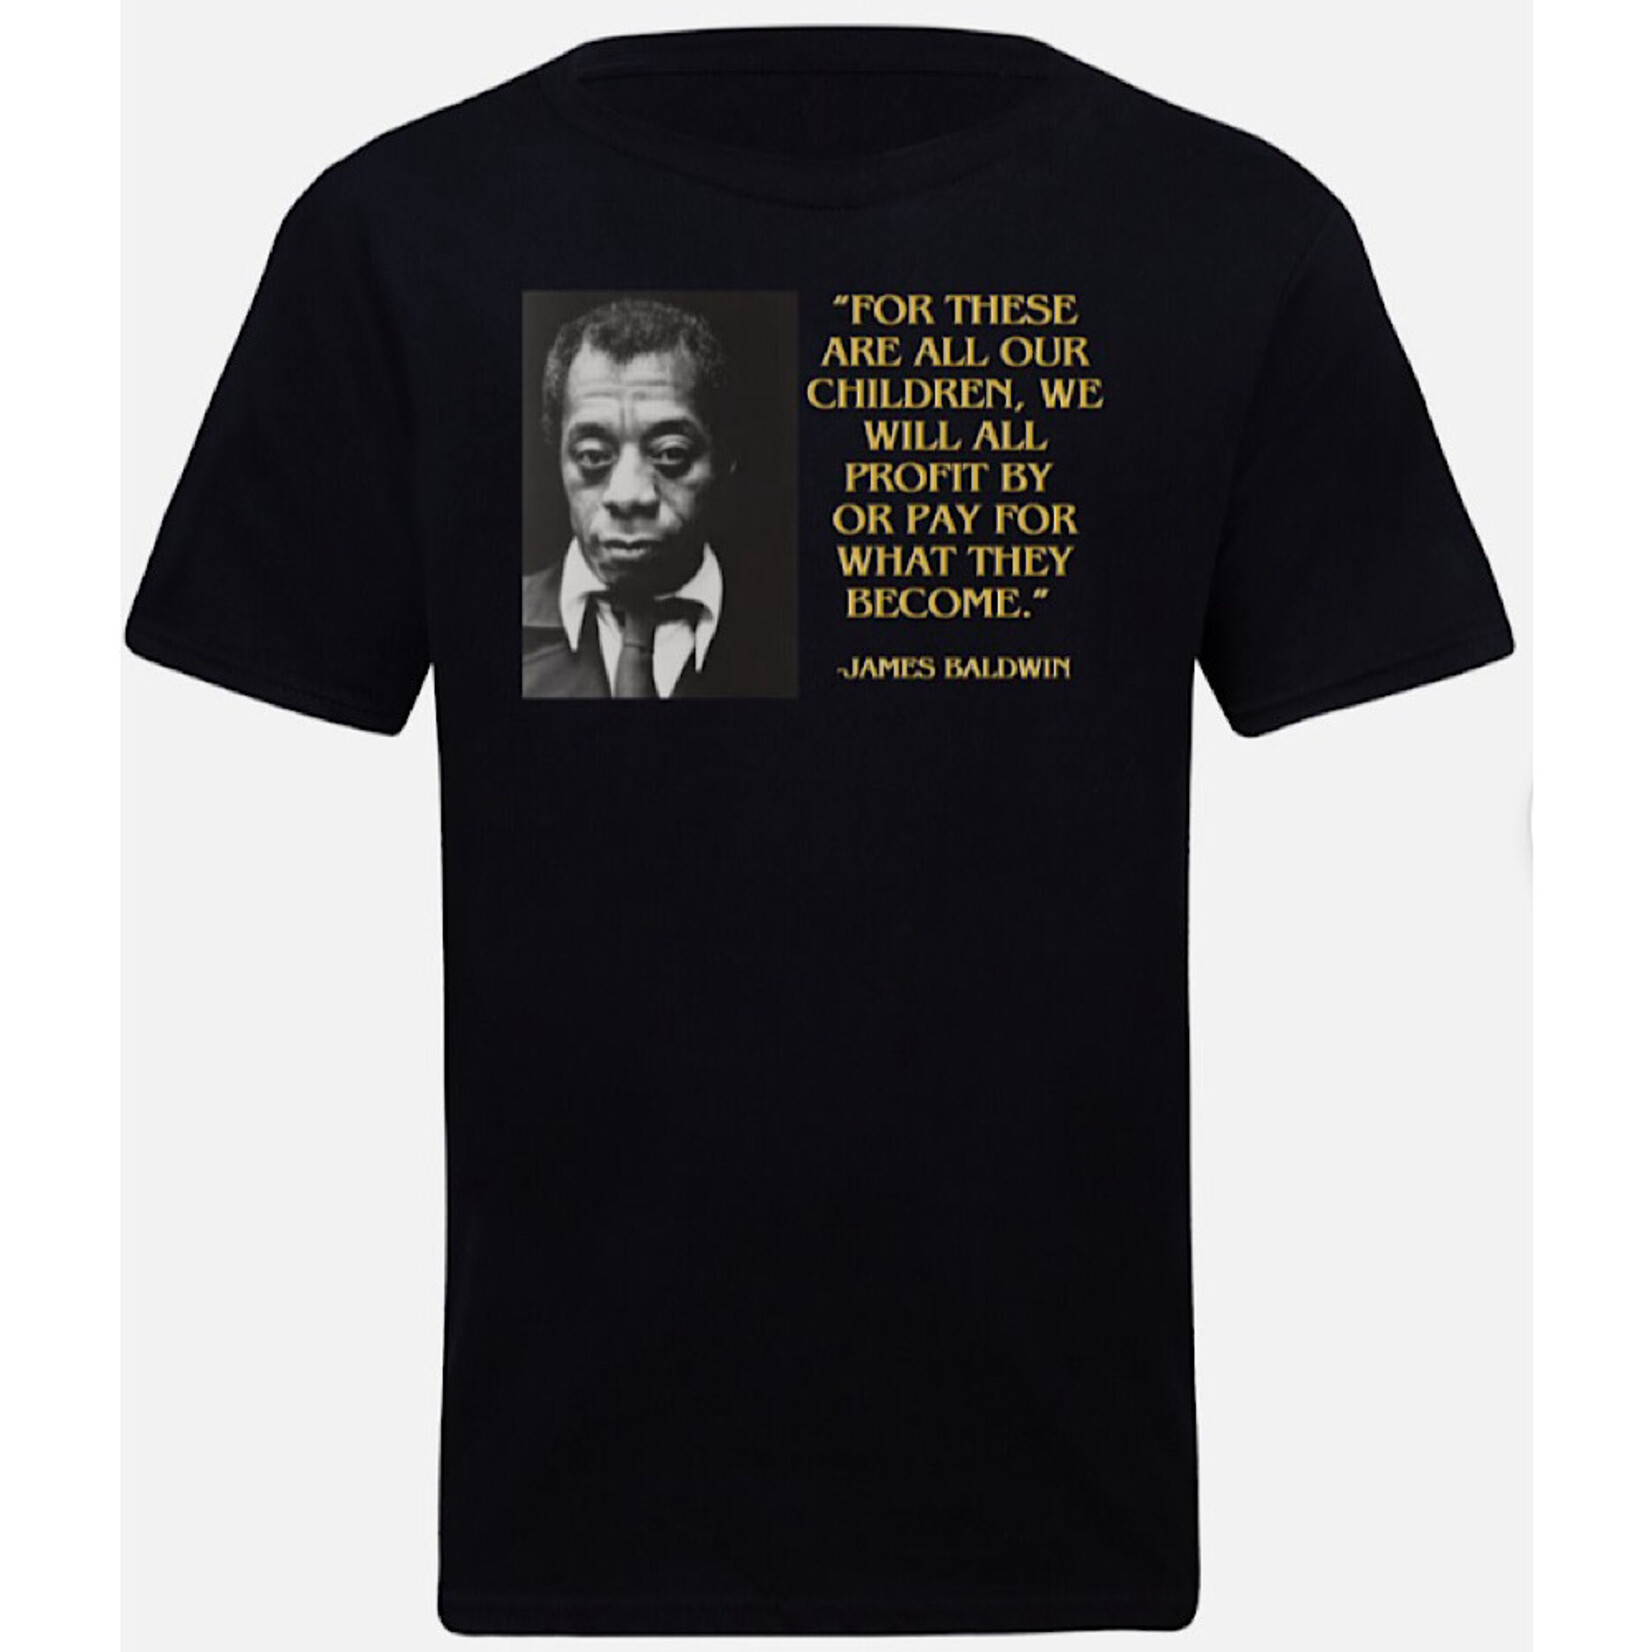 Bad Annie’s T-Shirt - For These Are All Our Children, We Will All Profit By Or Pay For What They Become - James Baldwin